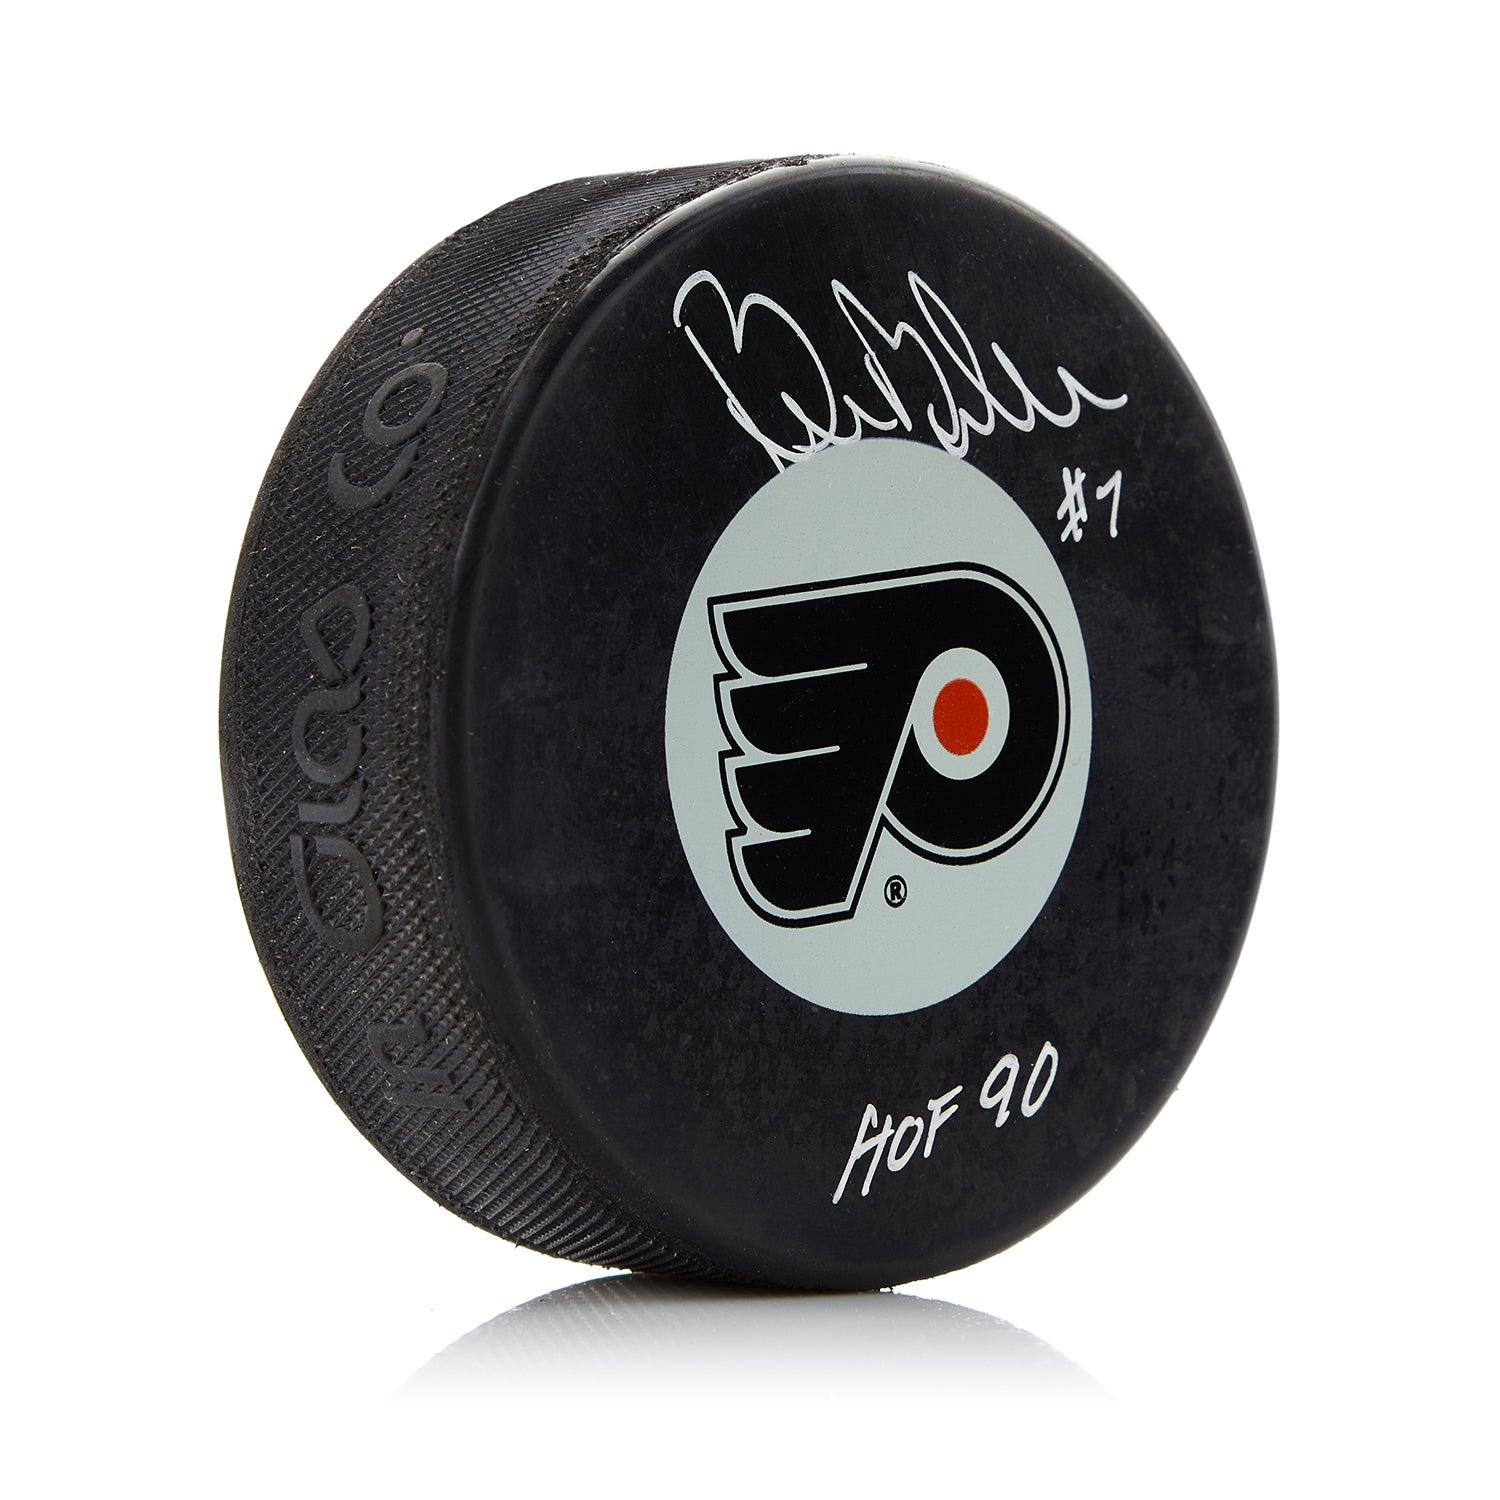 Bill Barber Philadelphia Flyers Autographed Hockey Puck with HOF Note